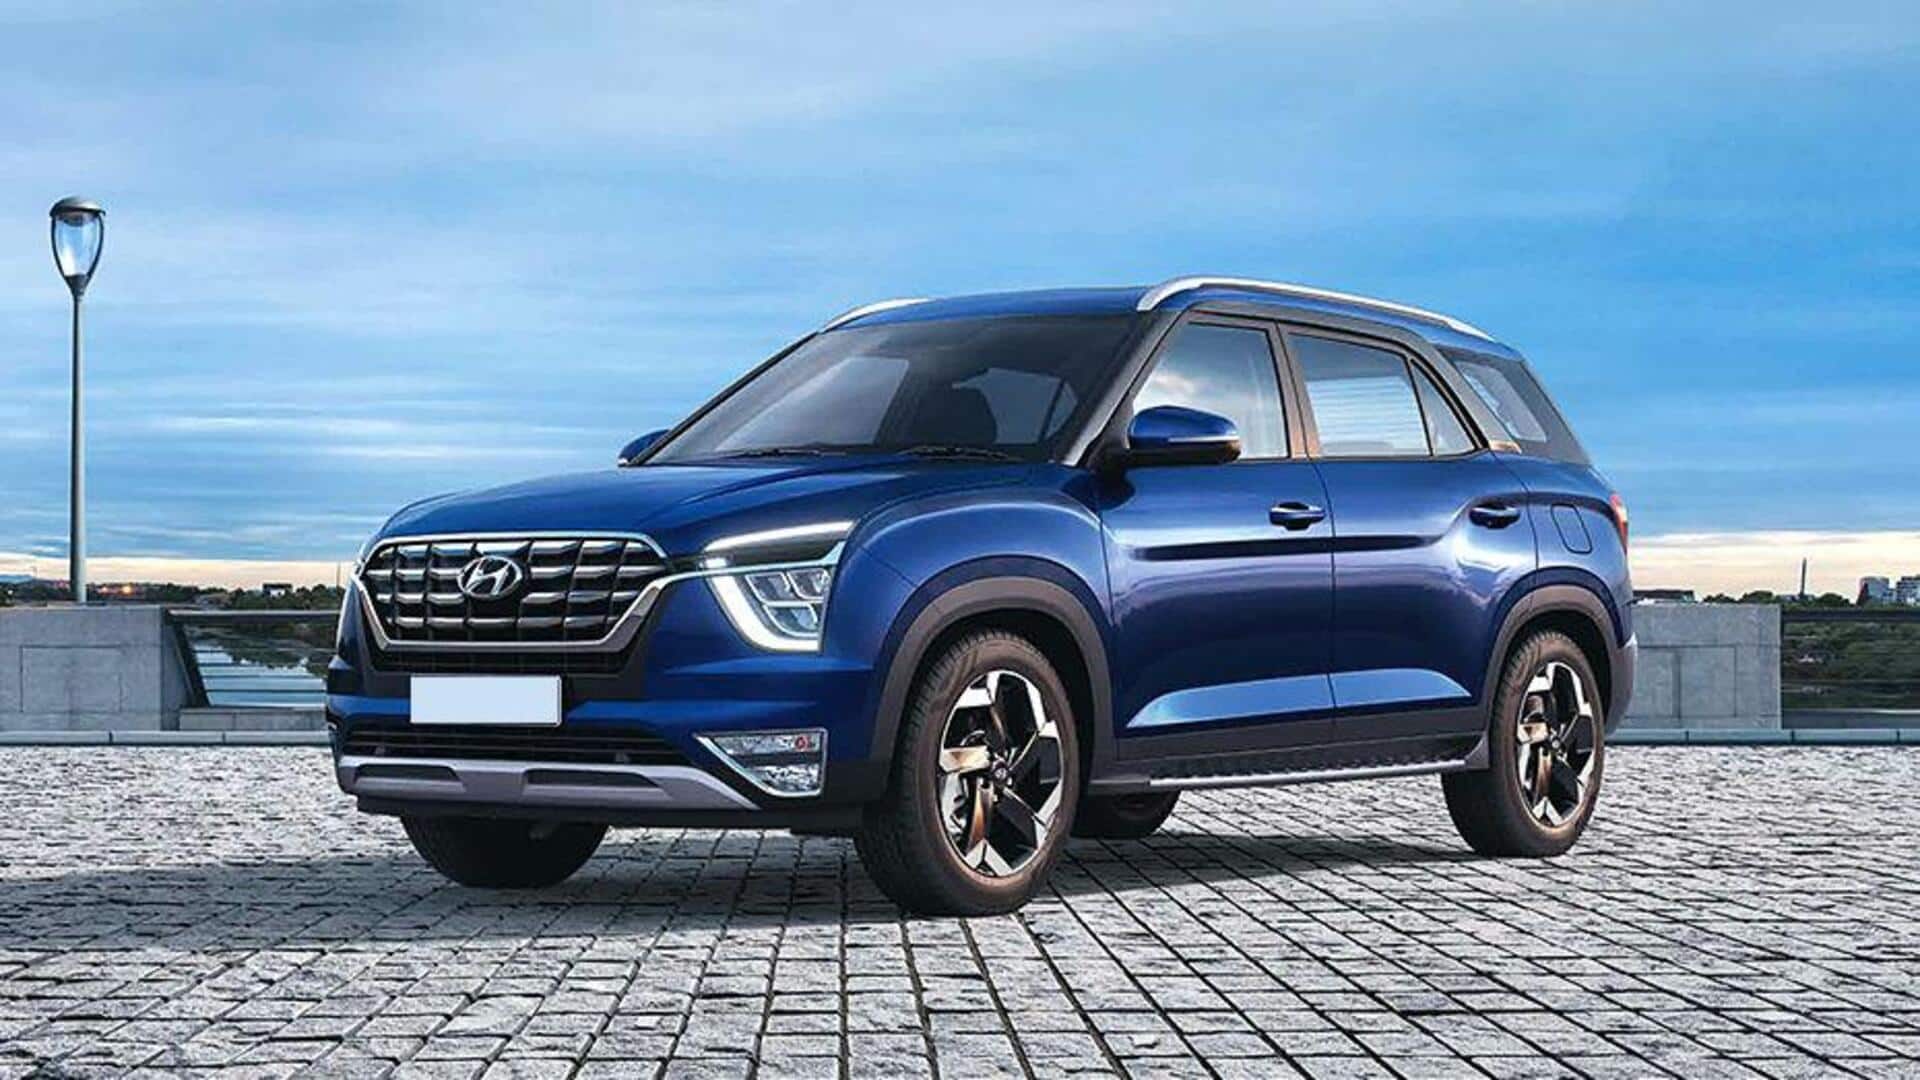 Hyundai Alcazar (facelift) to get new alloy wheels and grille